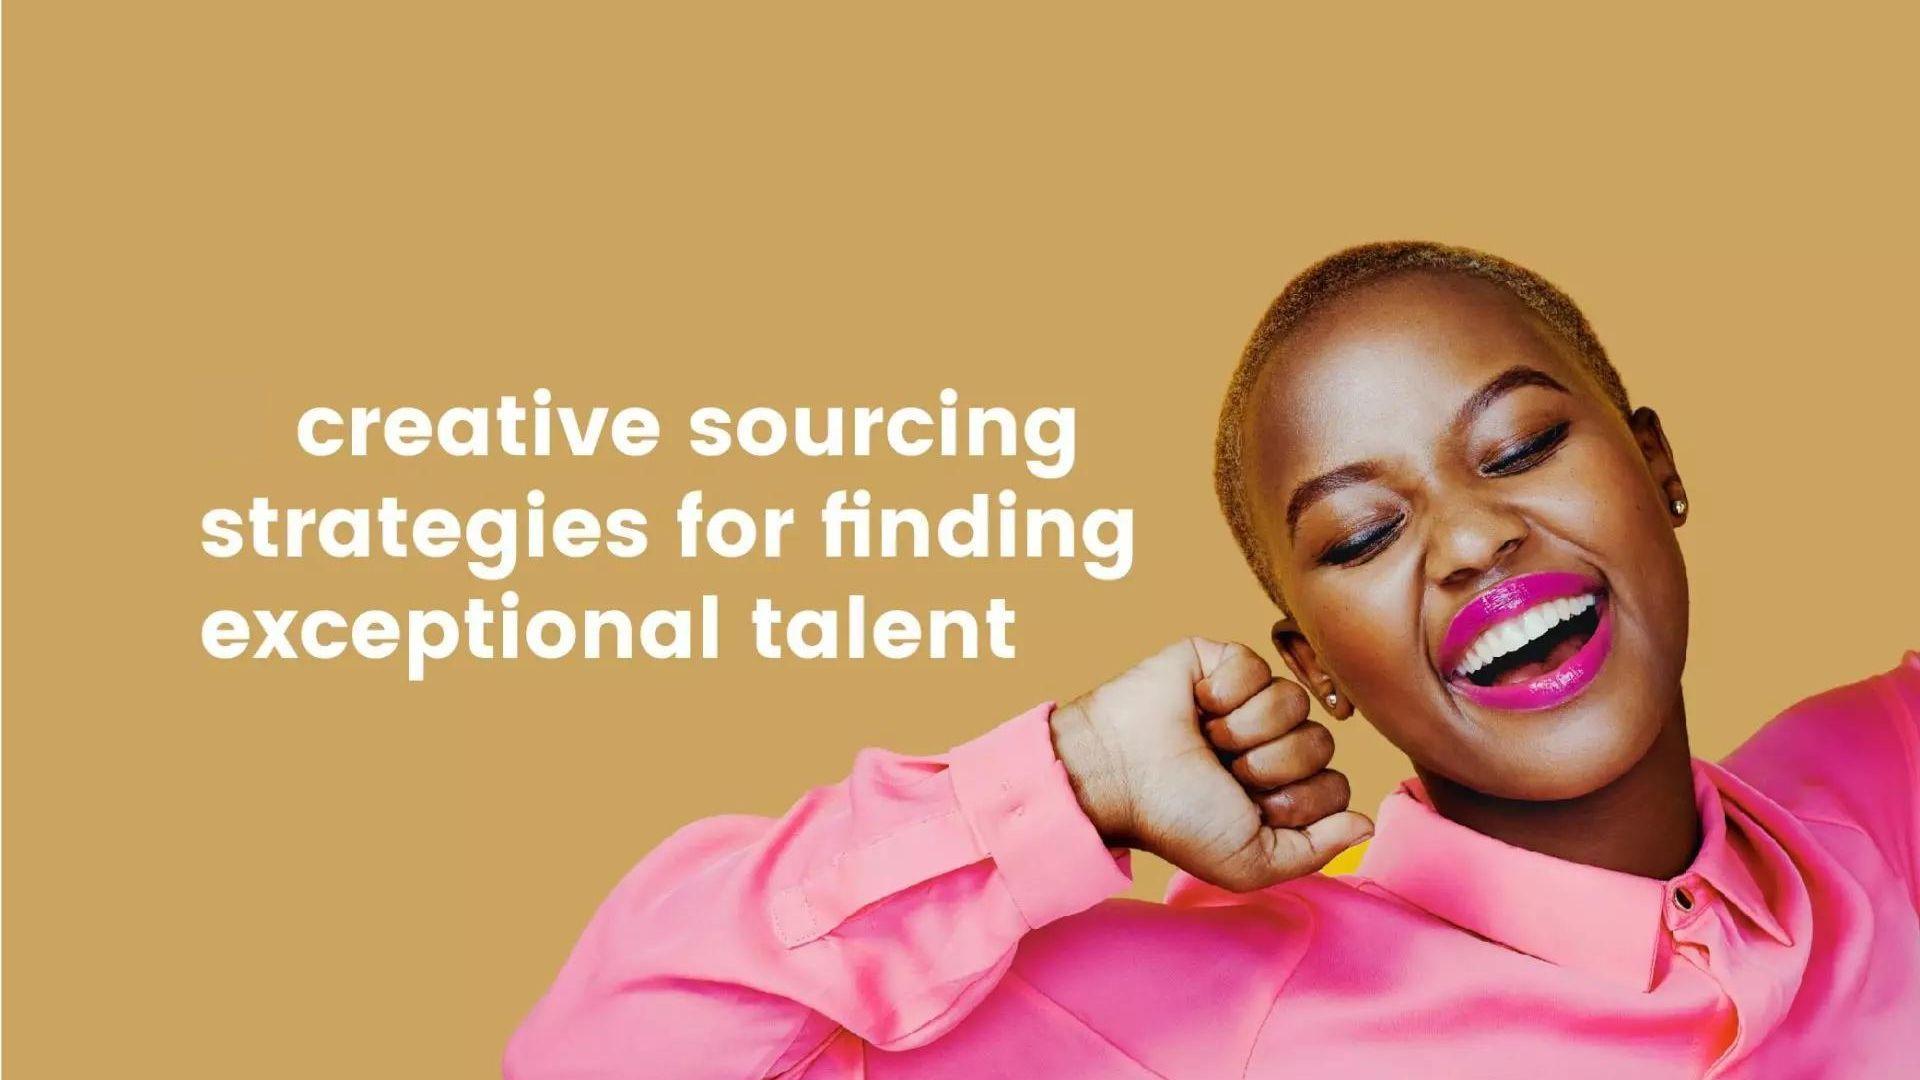 sreative-sourcing-strategies-for-finding-exceptional-talent